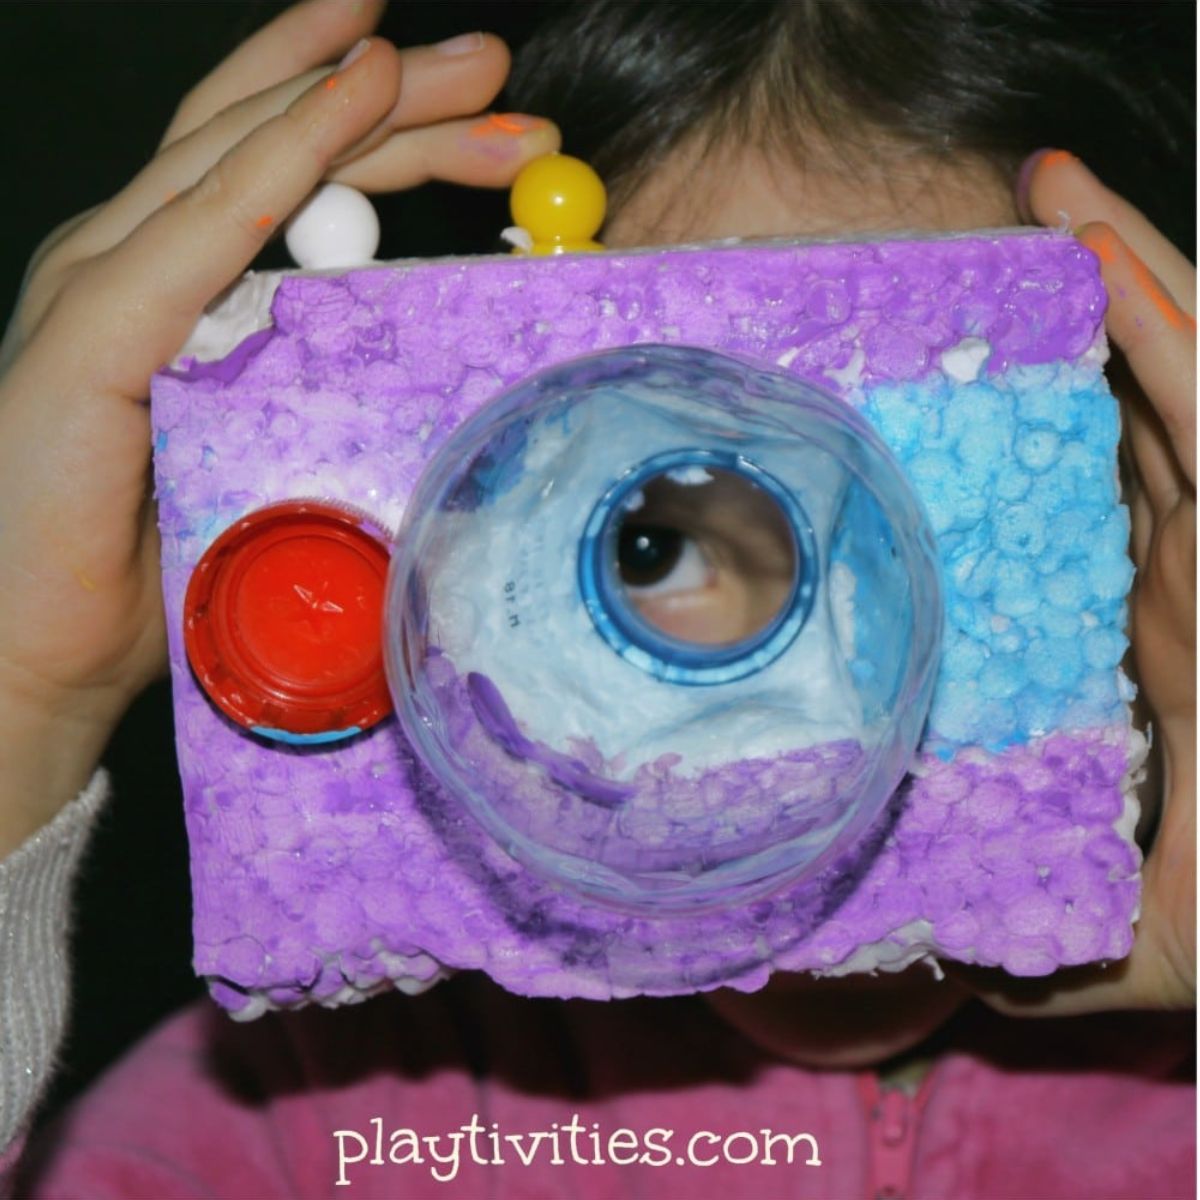 Young girl playing with a styrofoam toy camera.